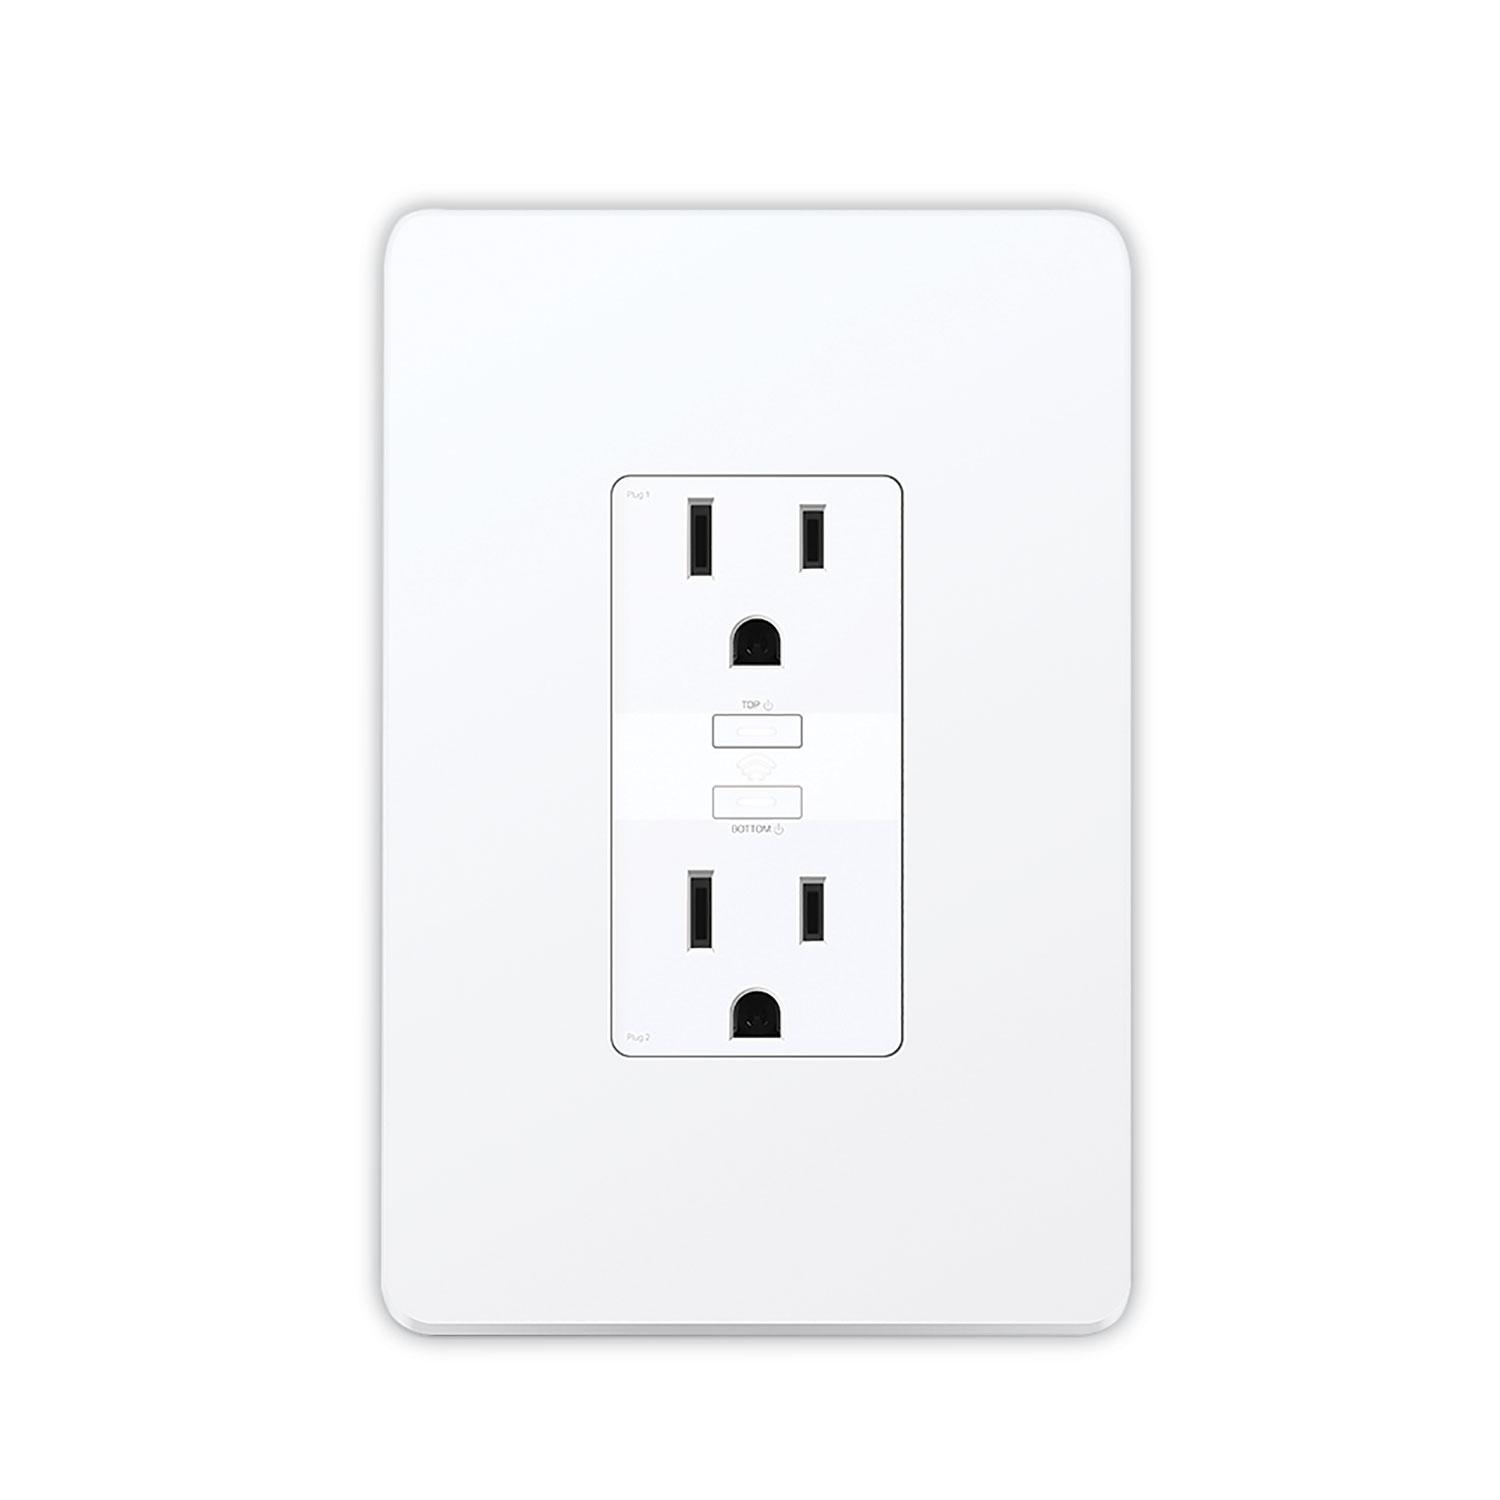 TP-Link Kasa Smart Wi-Fi Power Outlet, Indoor, 2 Sockets, 3.33 x 1.73 x 5.11